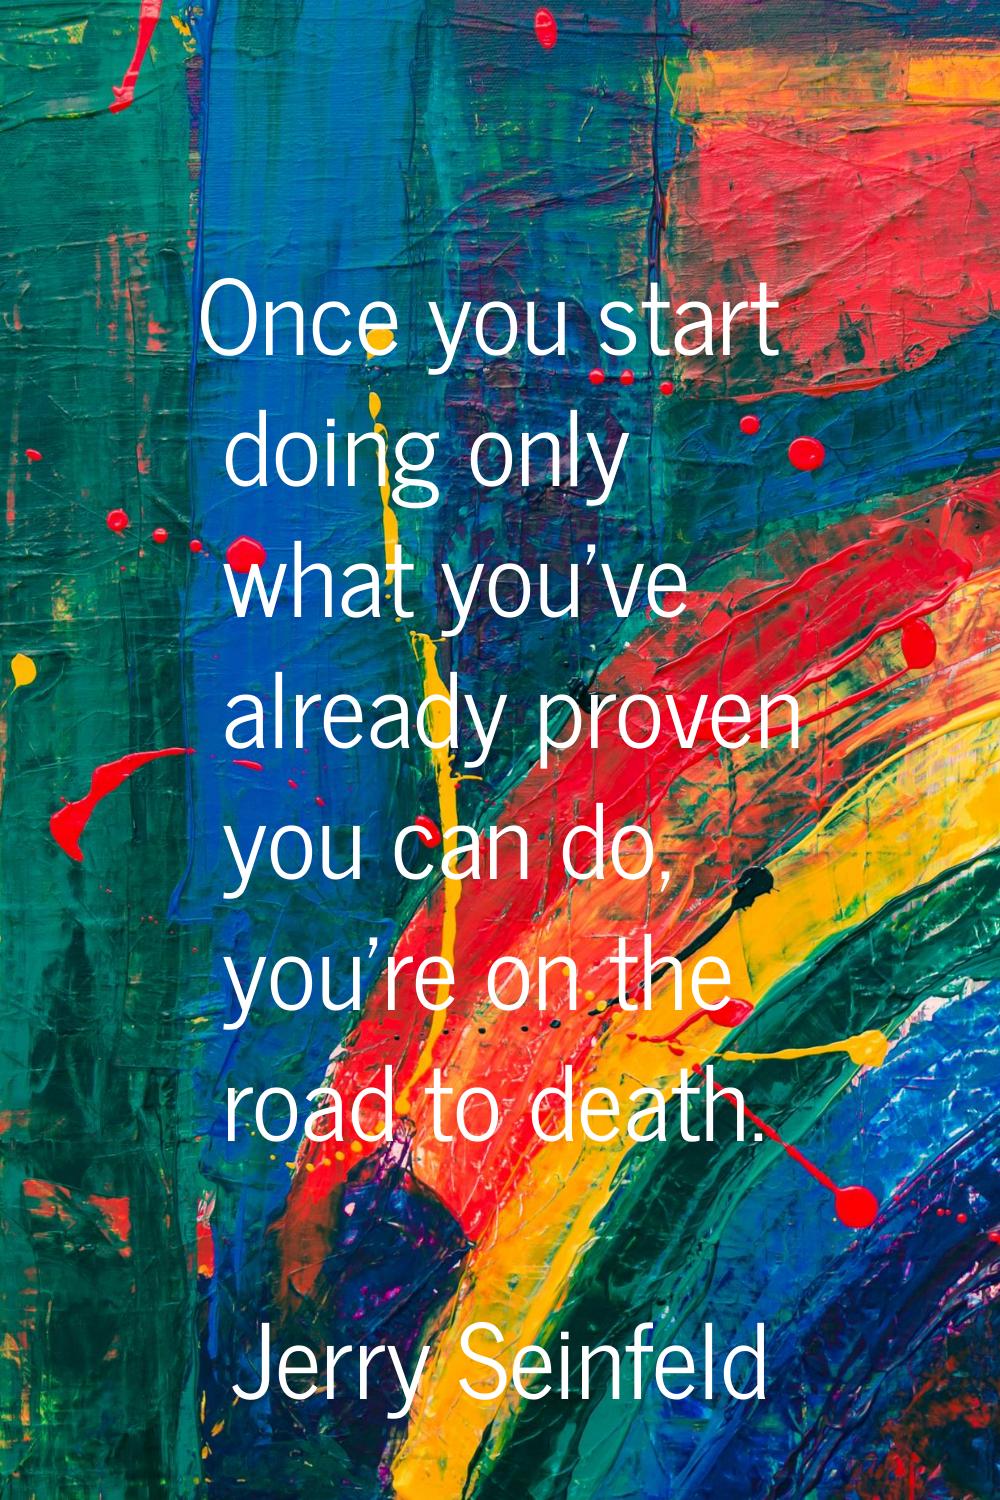 Once you start doing only what you've already proven you can do, you're on the road to death.